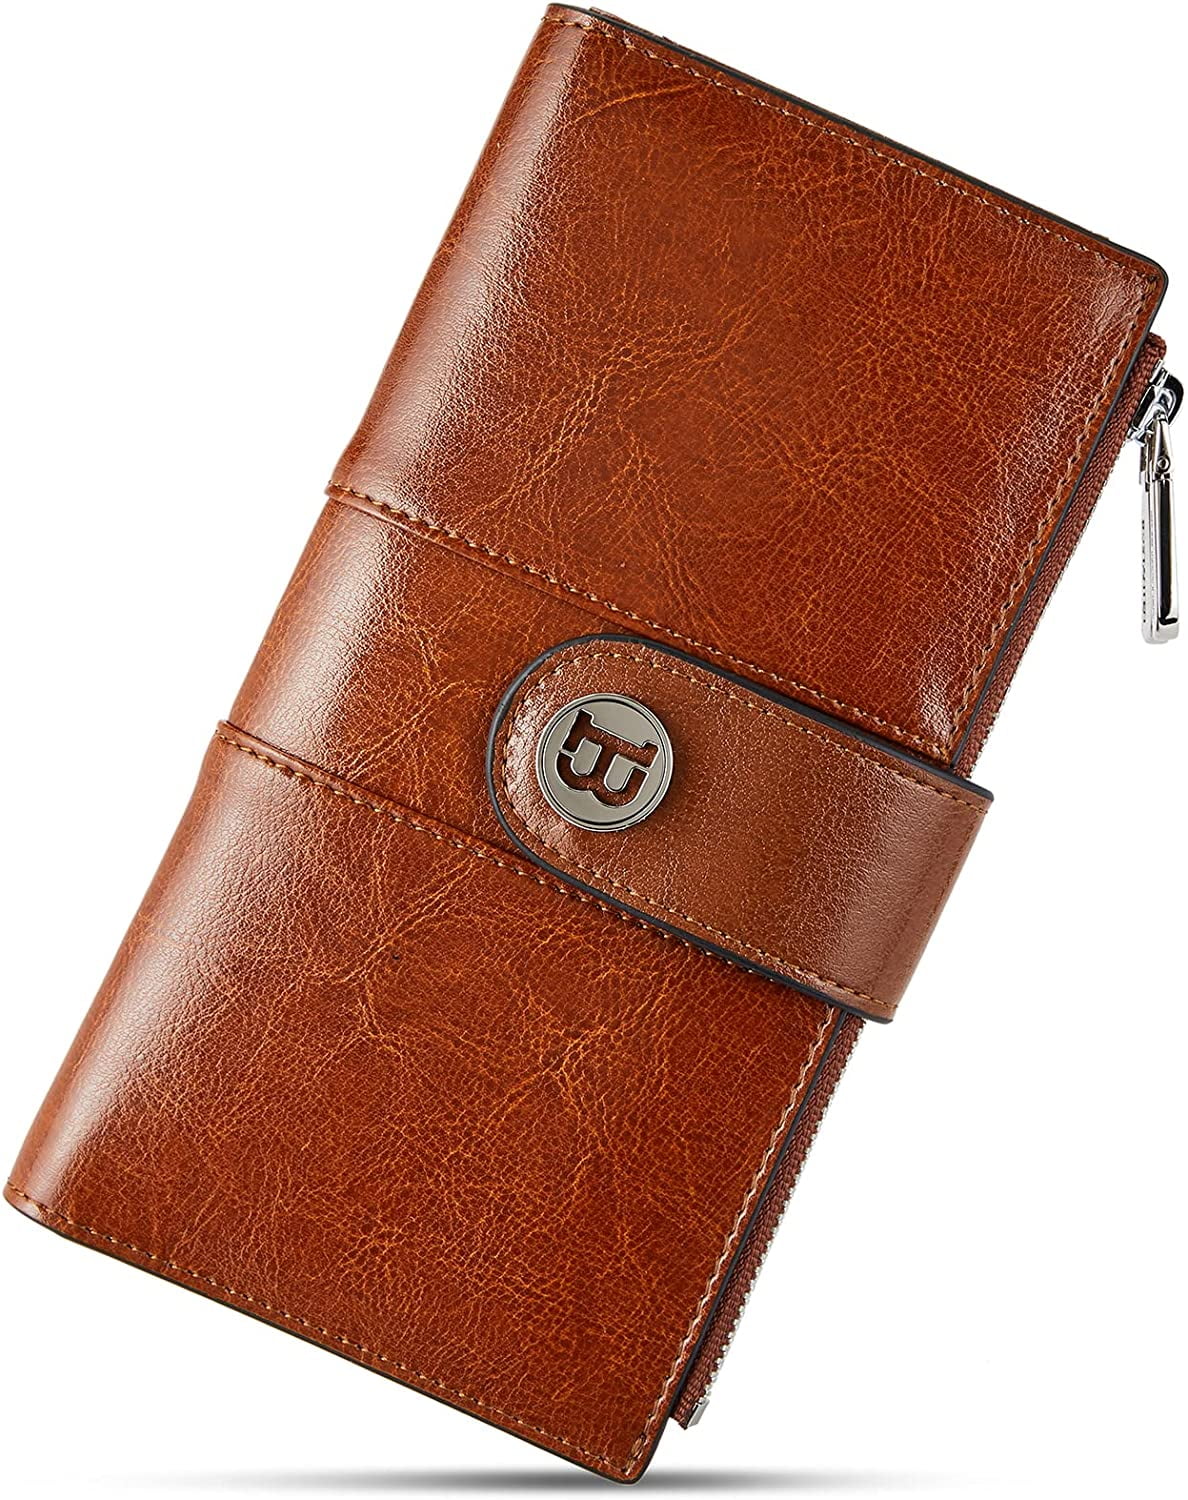 Double Zipper Wallet for Women,Large Capacity Long Wallet Credit Card Hoder  Brown - $23 (20% Off Retail) New With Tags - From Sunshine